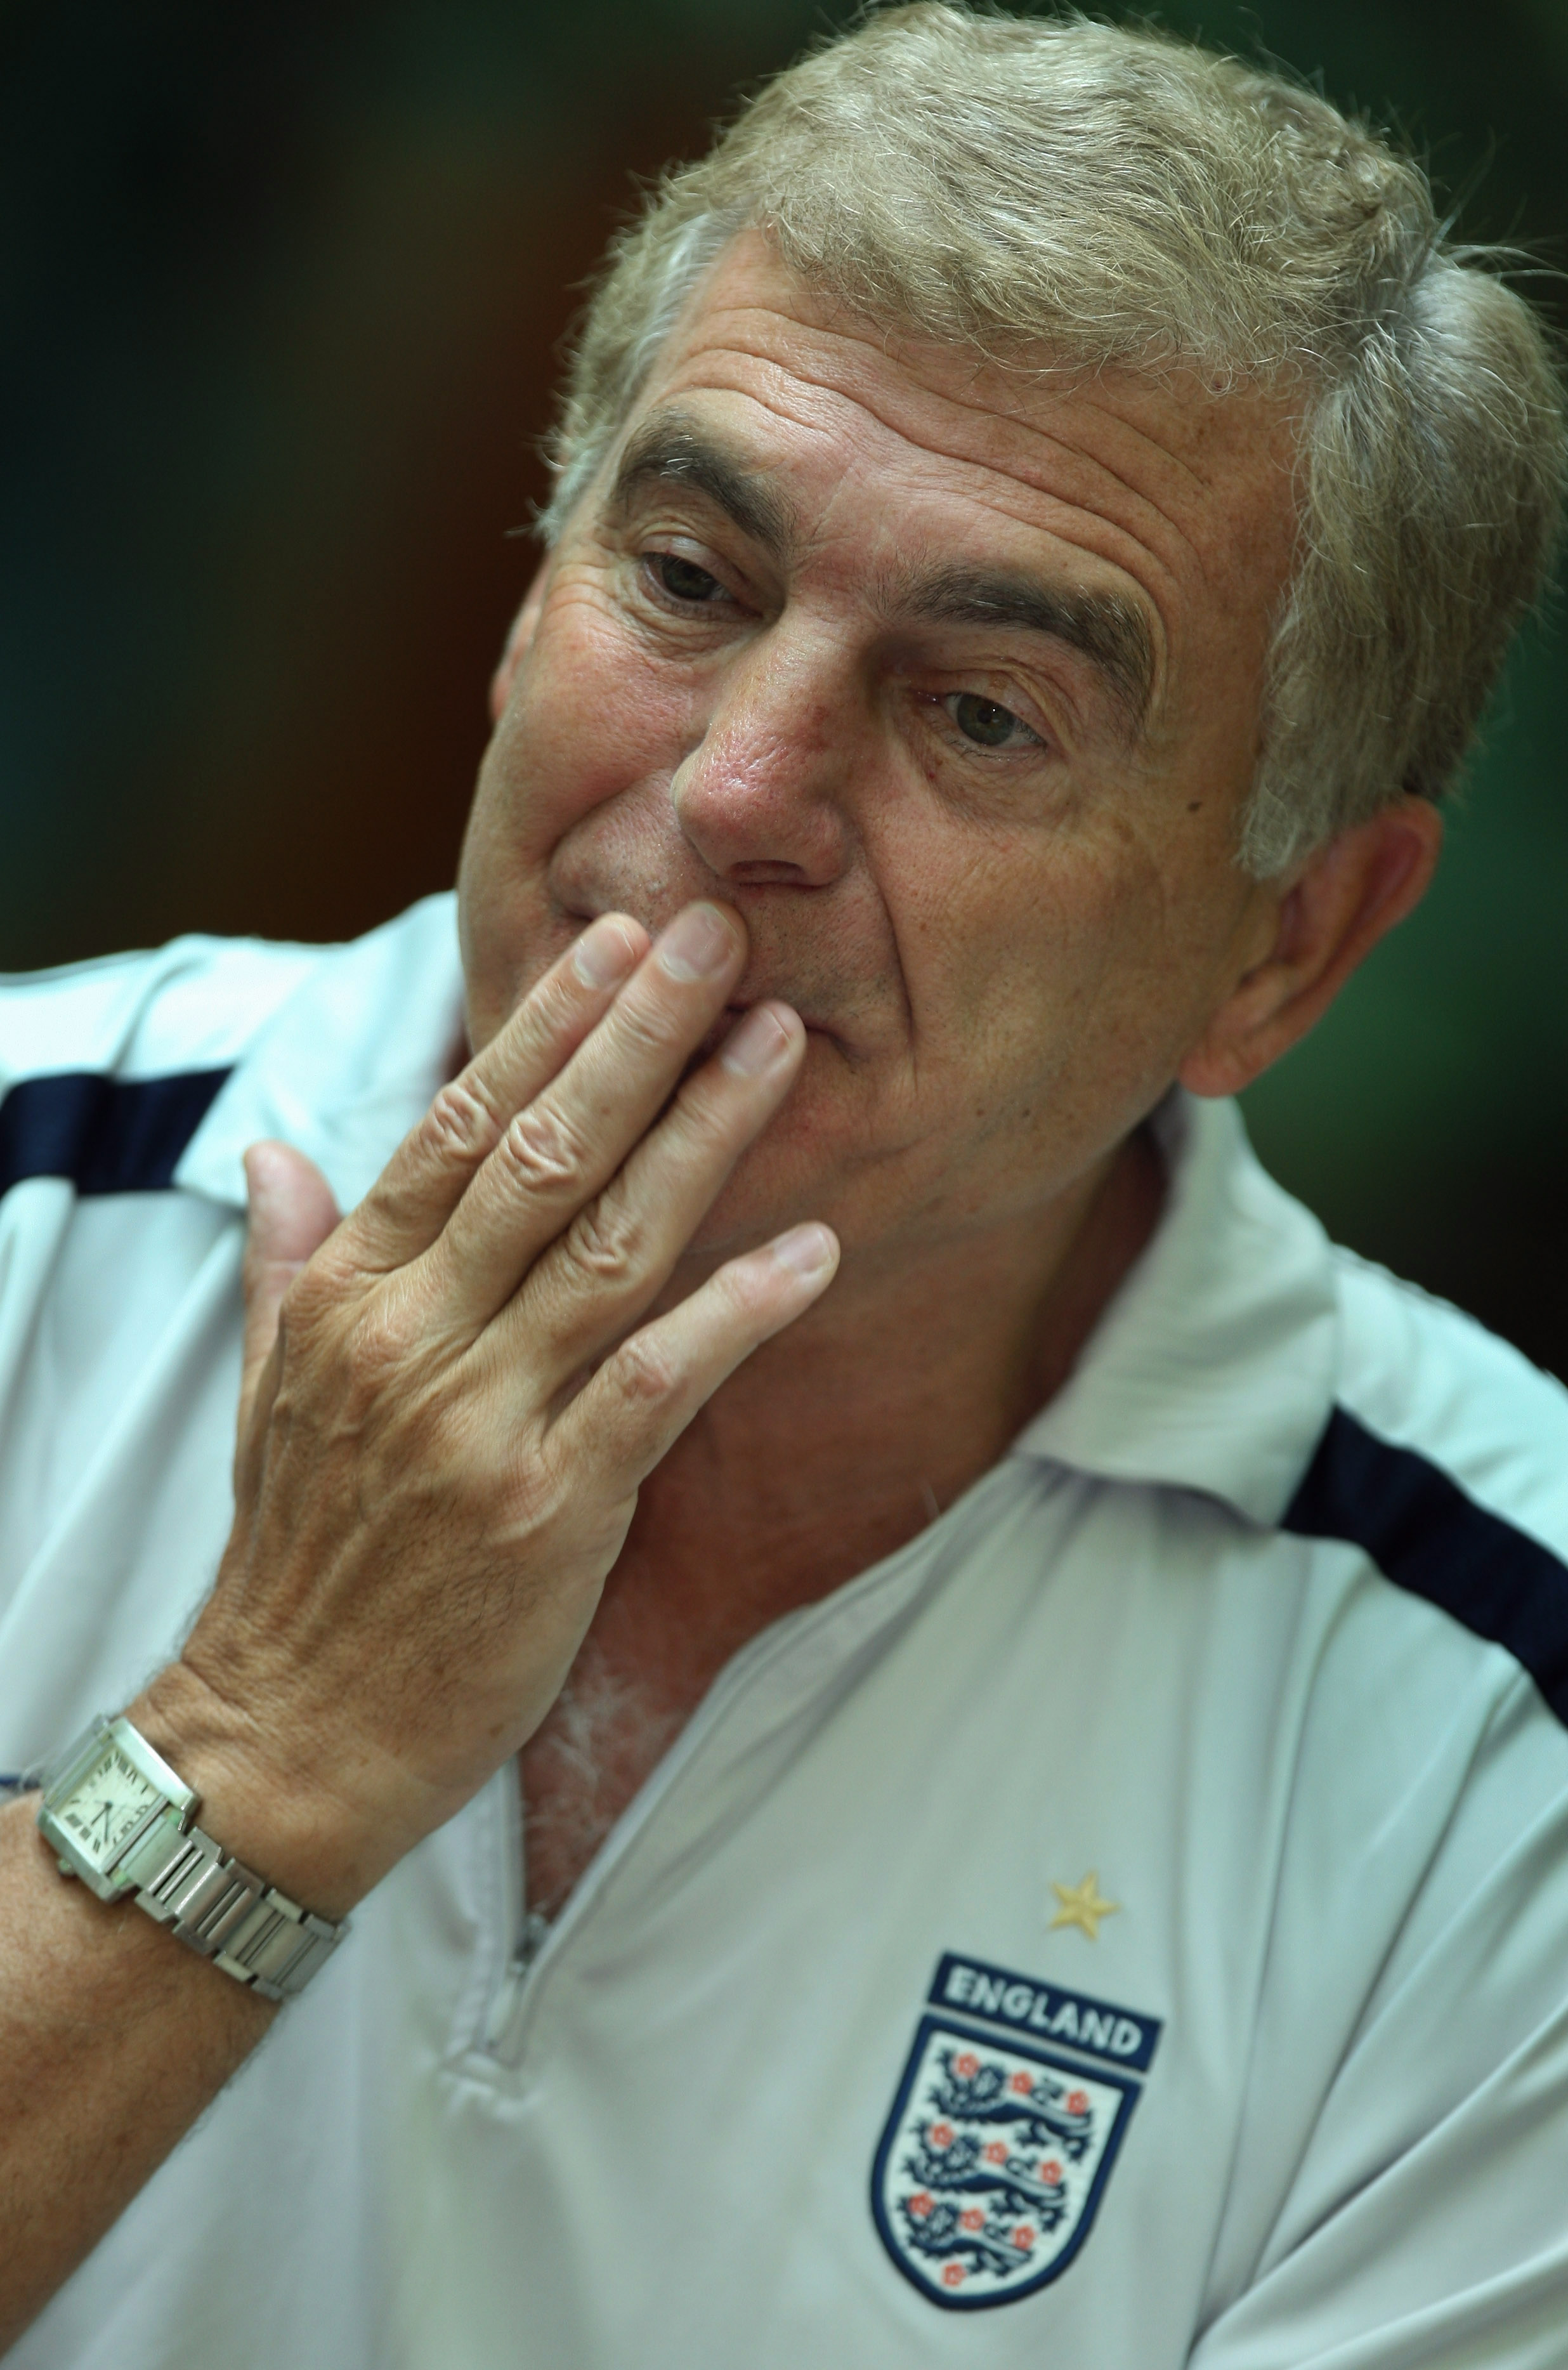 LIBEREC, CZECH REPUBLIC - JULY 17:  Sir Trevor Brooking answers questions during an England U19 press conference at the Hotel Babylon on July 17, 2008 in Liberec, Czech Republic.  (Photo by Gary M. Prior/Getty Images)